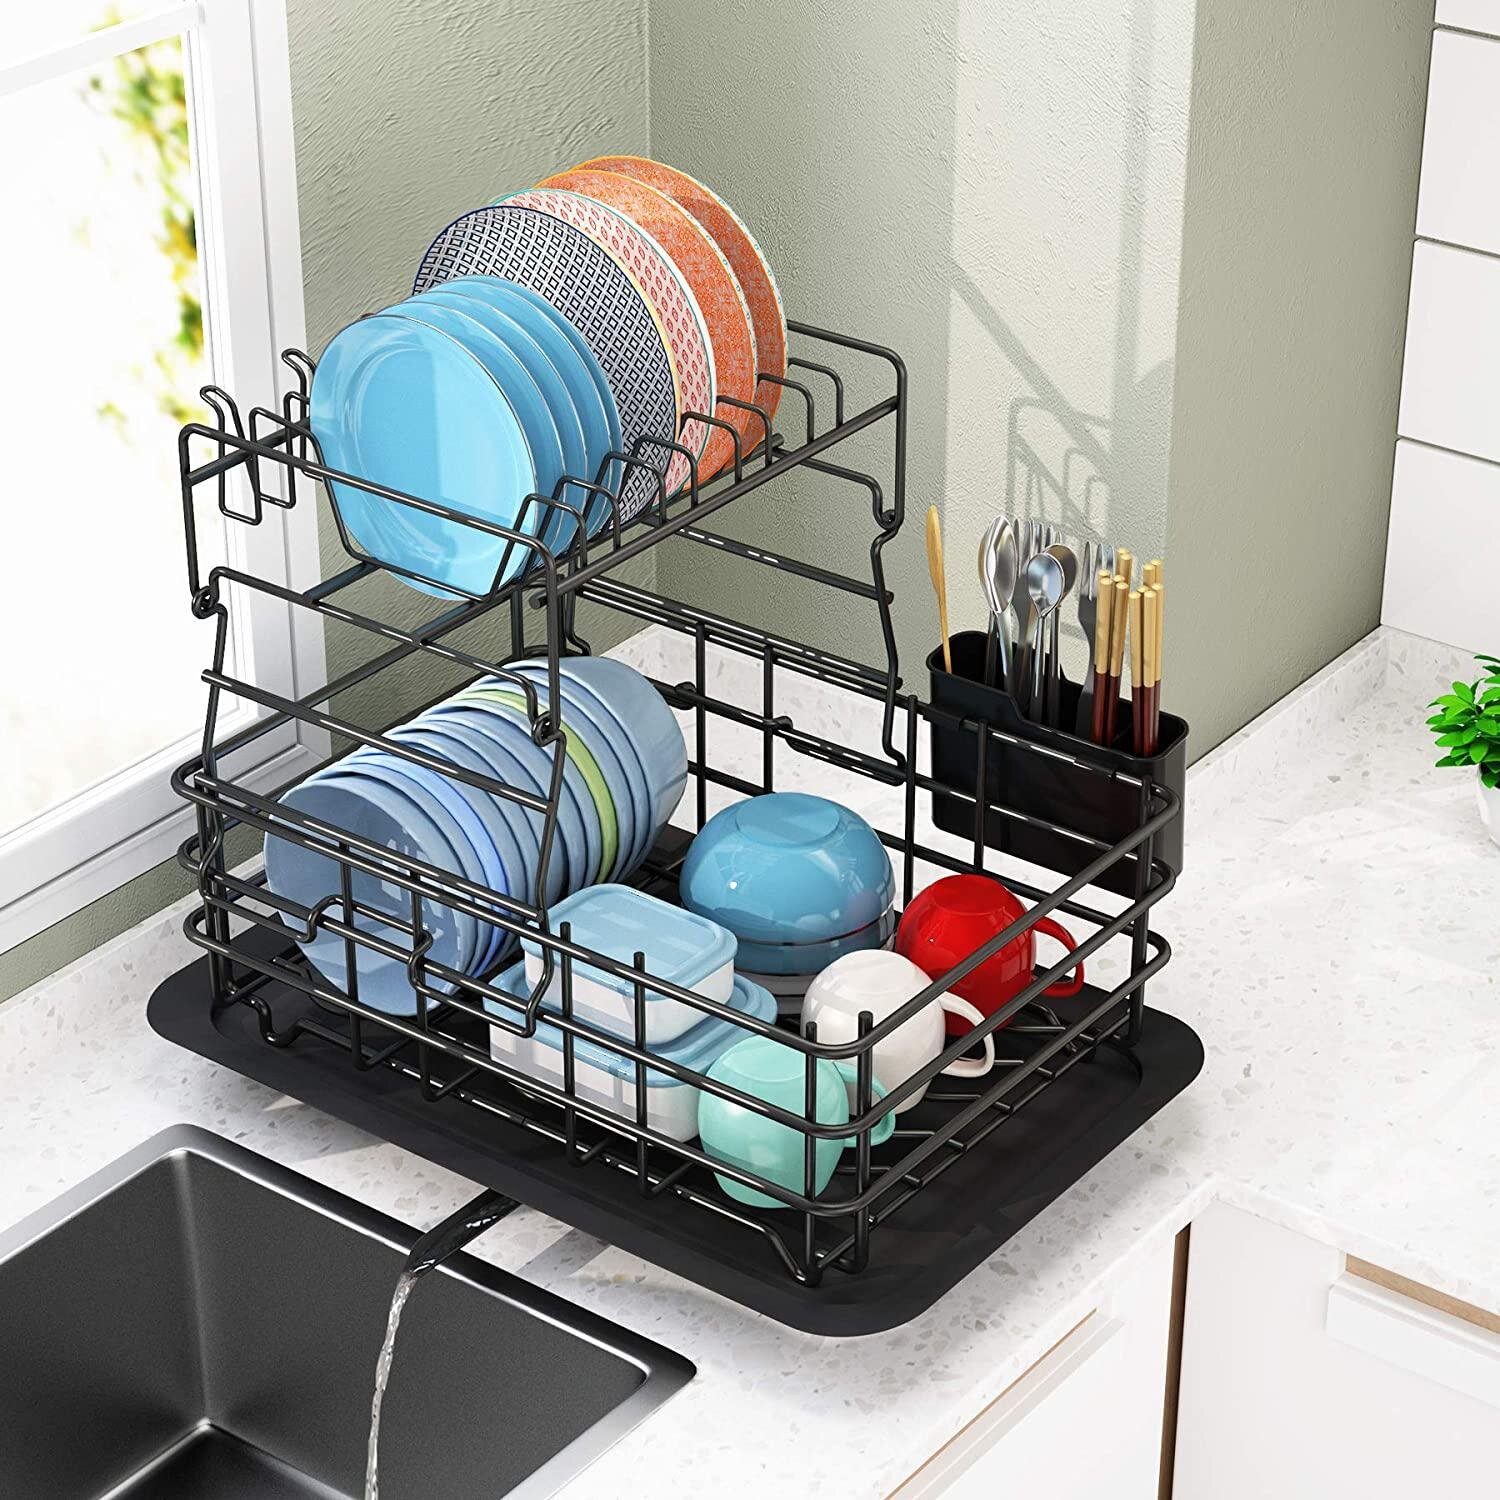 Stainless Steel Rustproof 2 Tier Dish Rack with Adjustable Pot Lid organizer Black Dish Drying Rack with Pot Holder Silverware Tray Glass Holder for Kitchen Counter